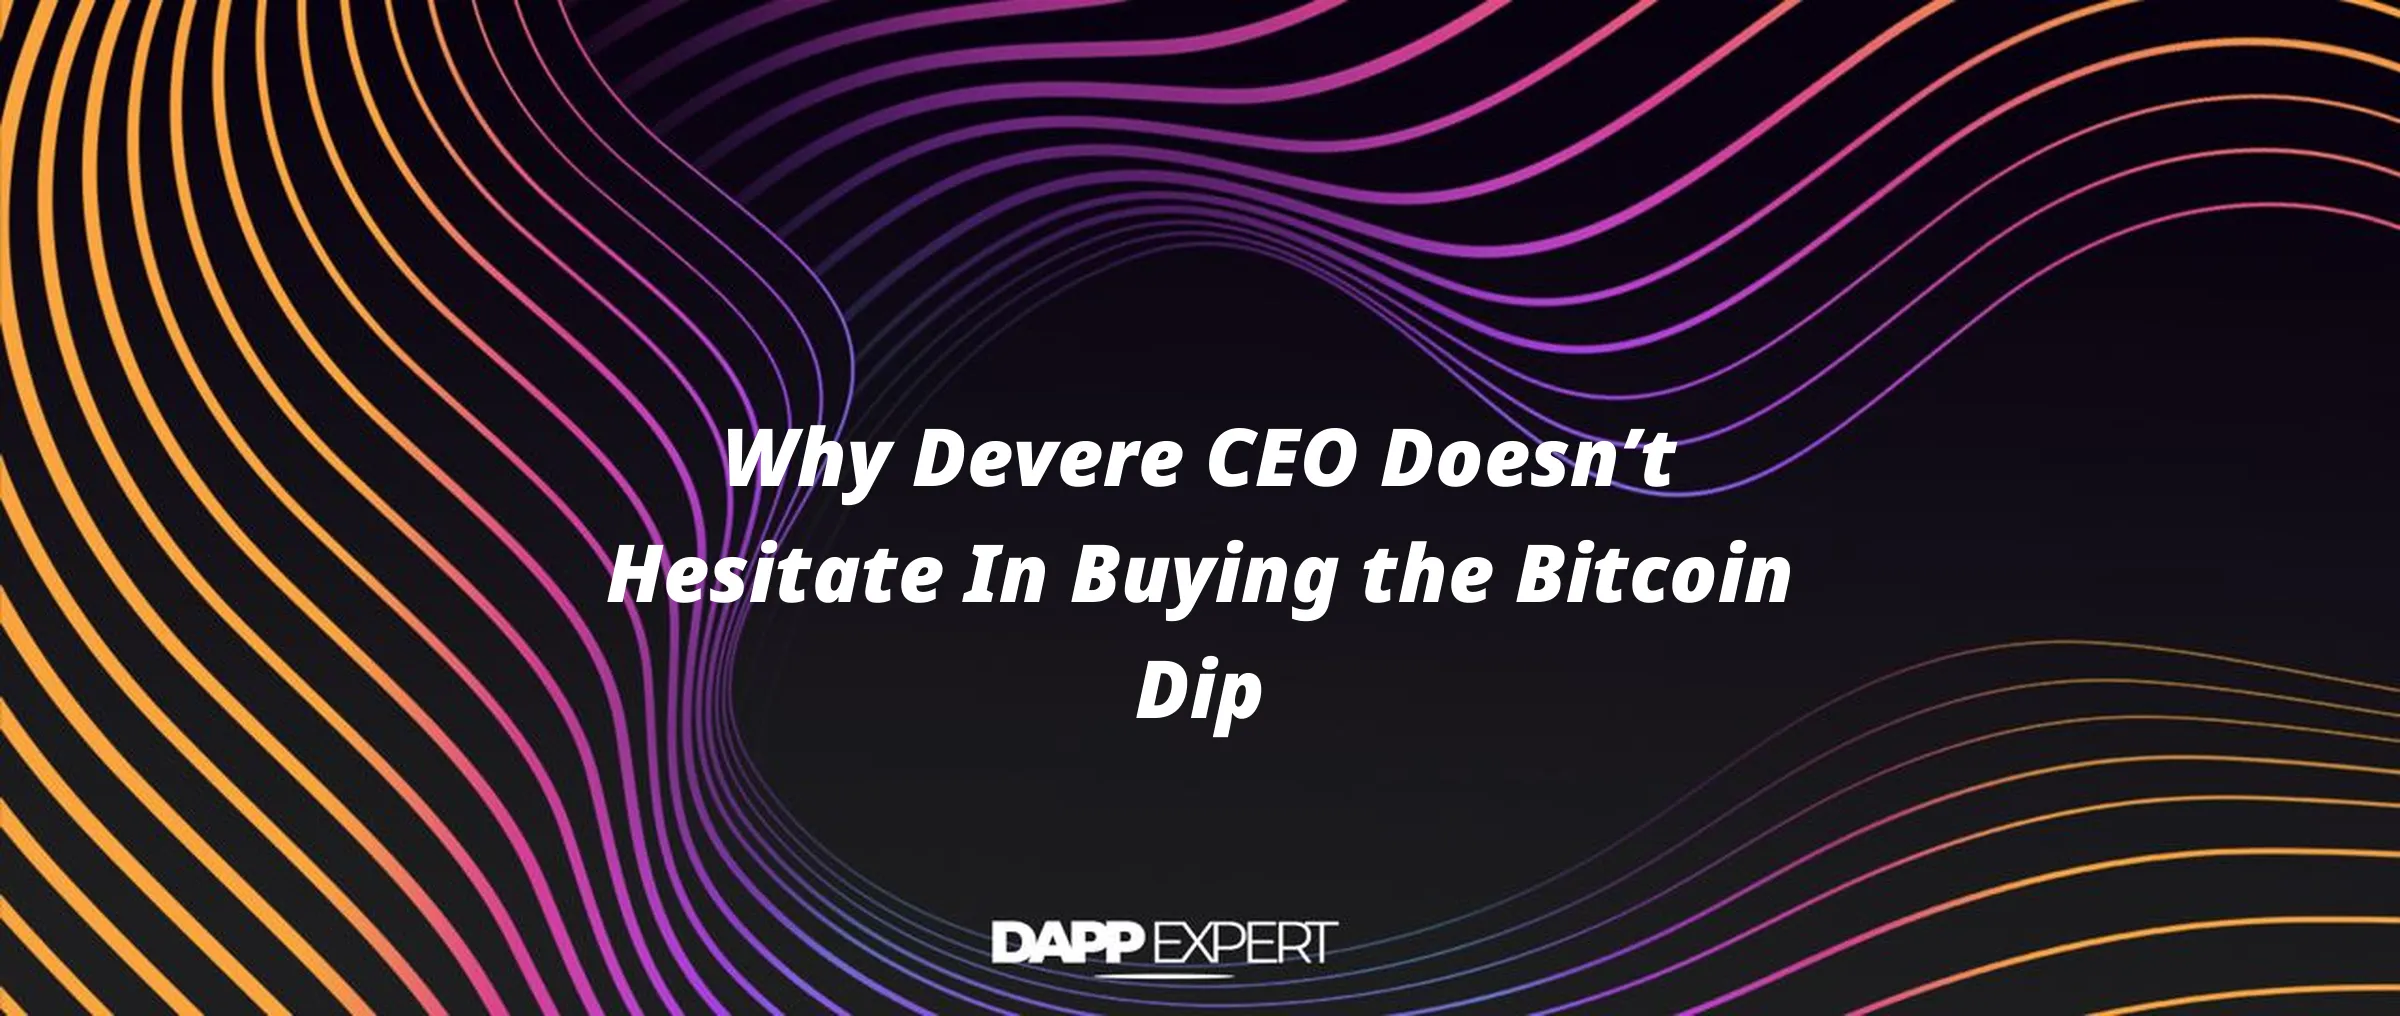 Why Devere CEO Doesn’t Hesitate In Buying the Bitcoin Dip